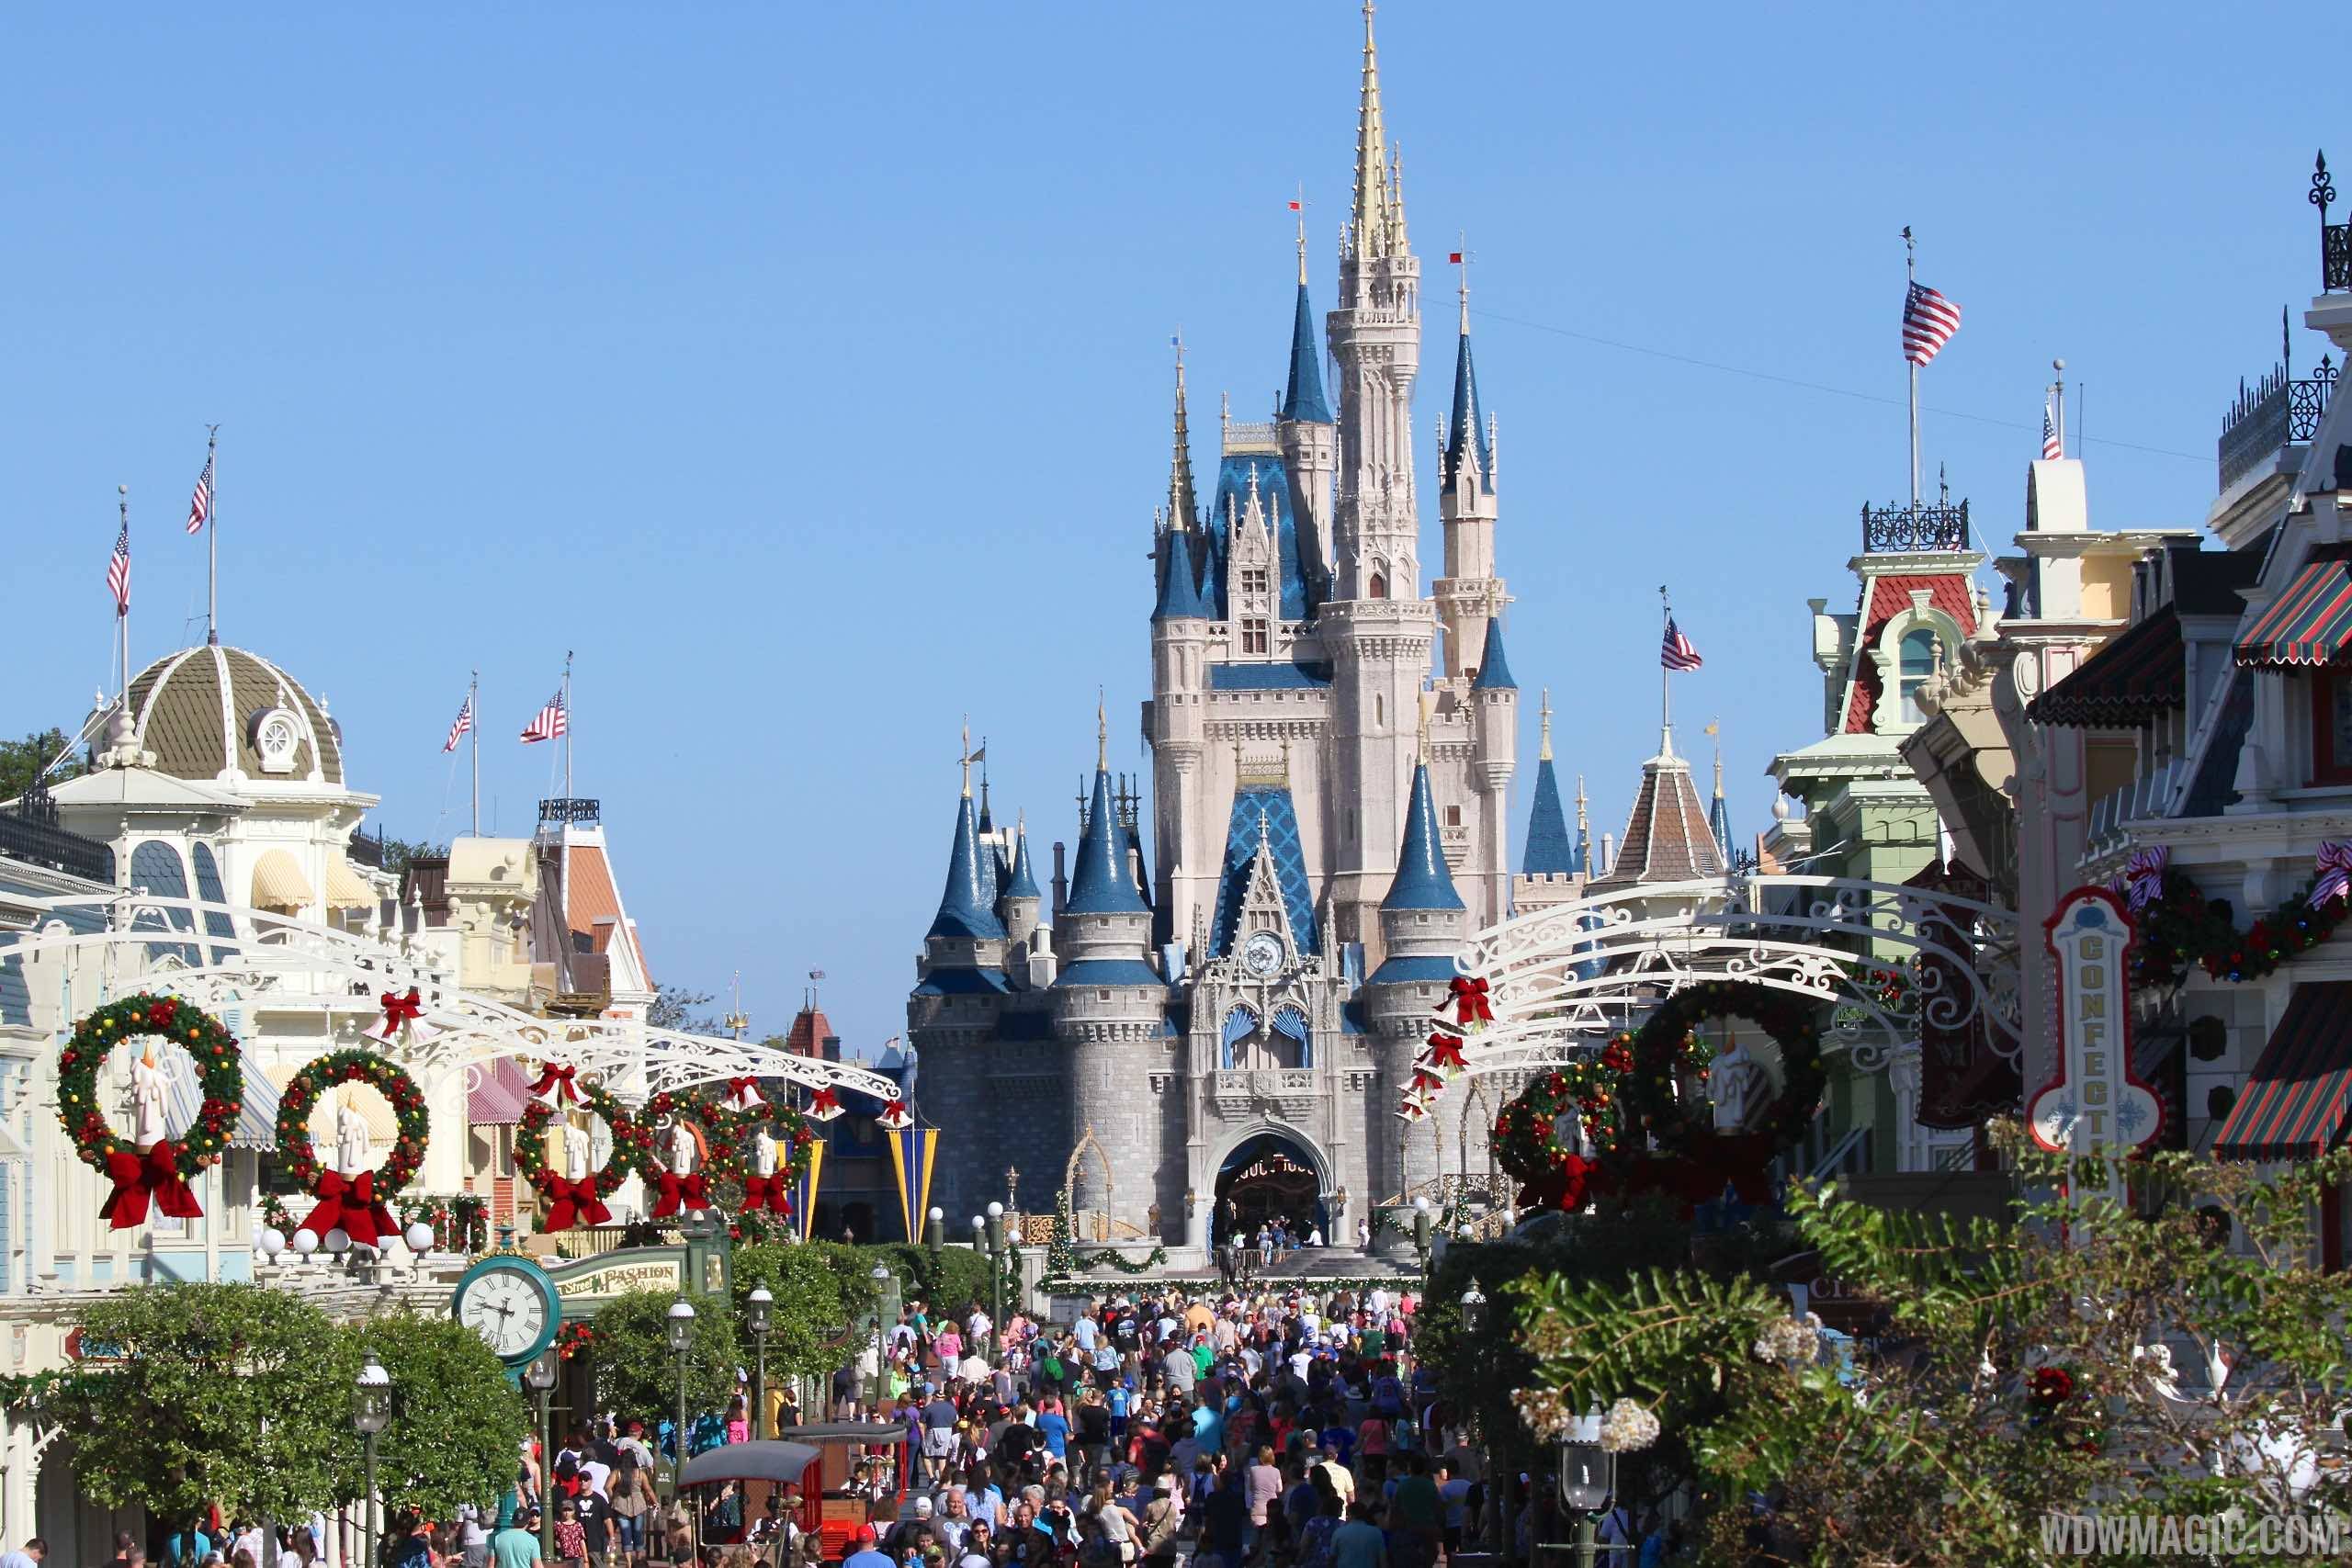 Holidays at the Magic Kingdom overview